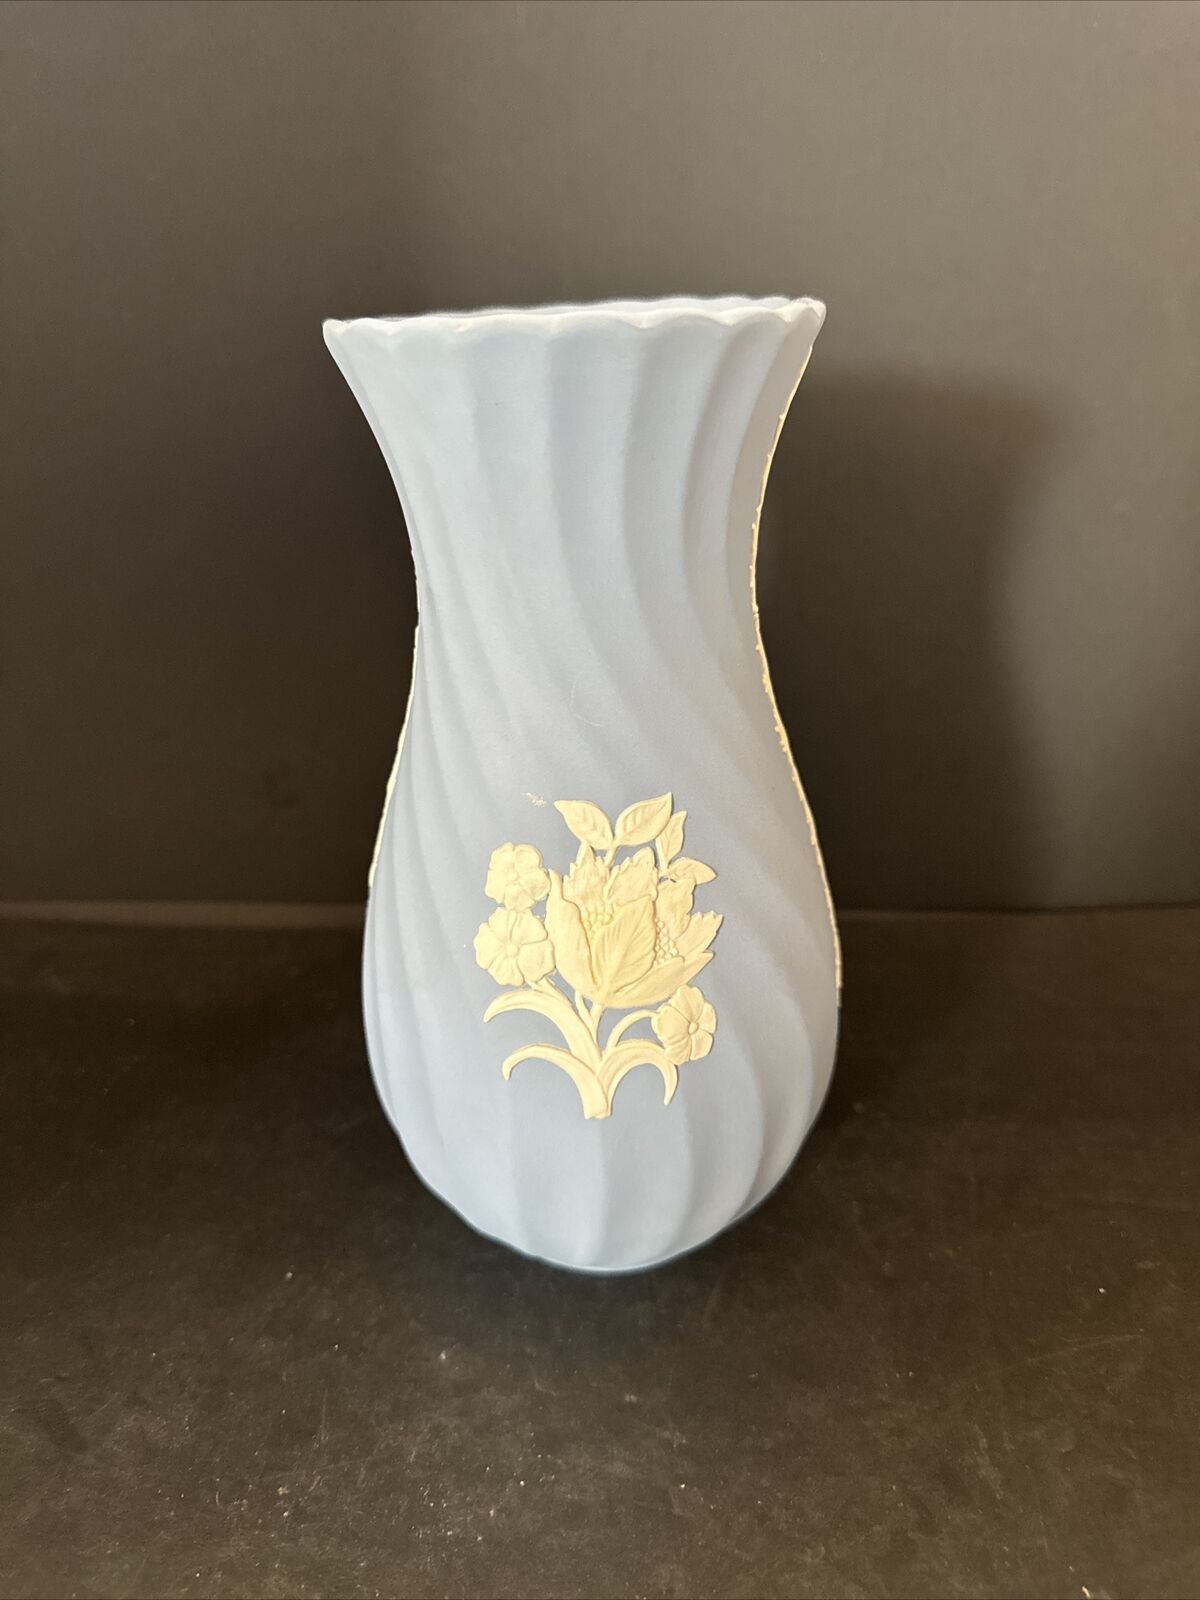 Gorgeous Large Wedgwood Blue Fluted Floral Vase 8 1/4” Tall Mint